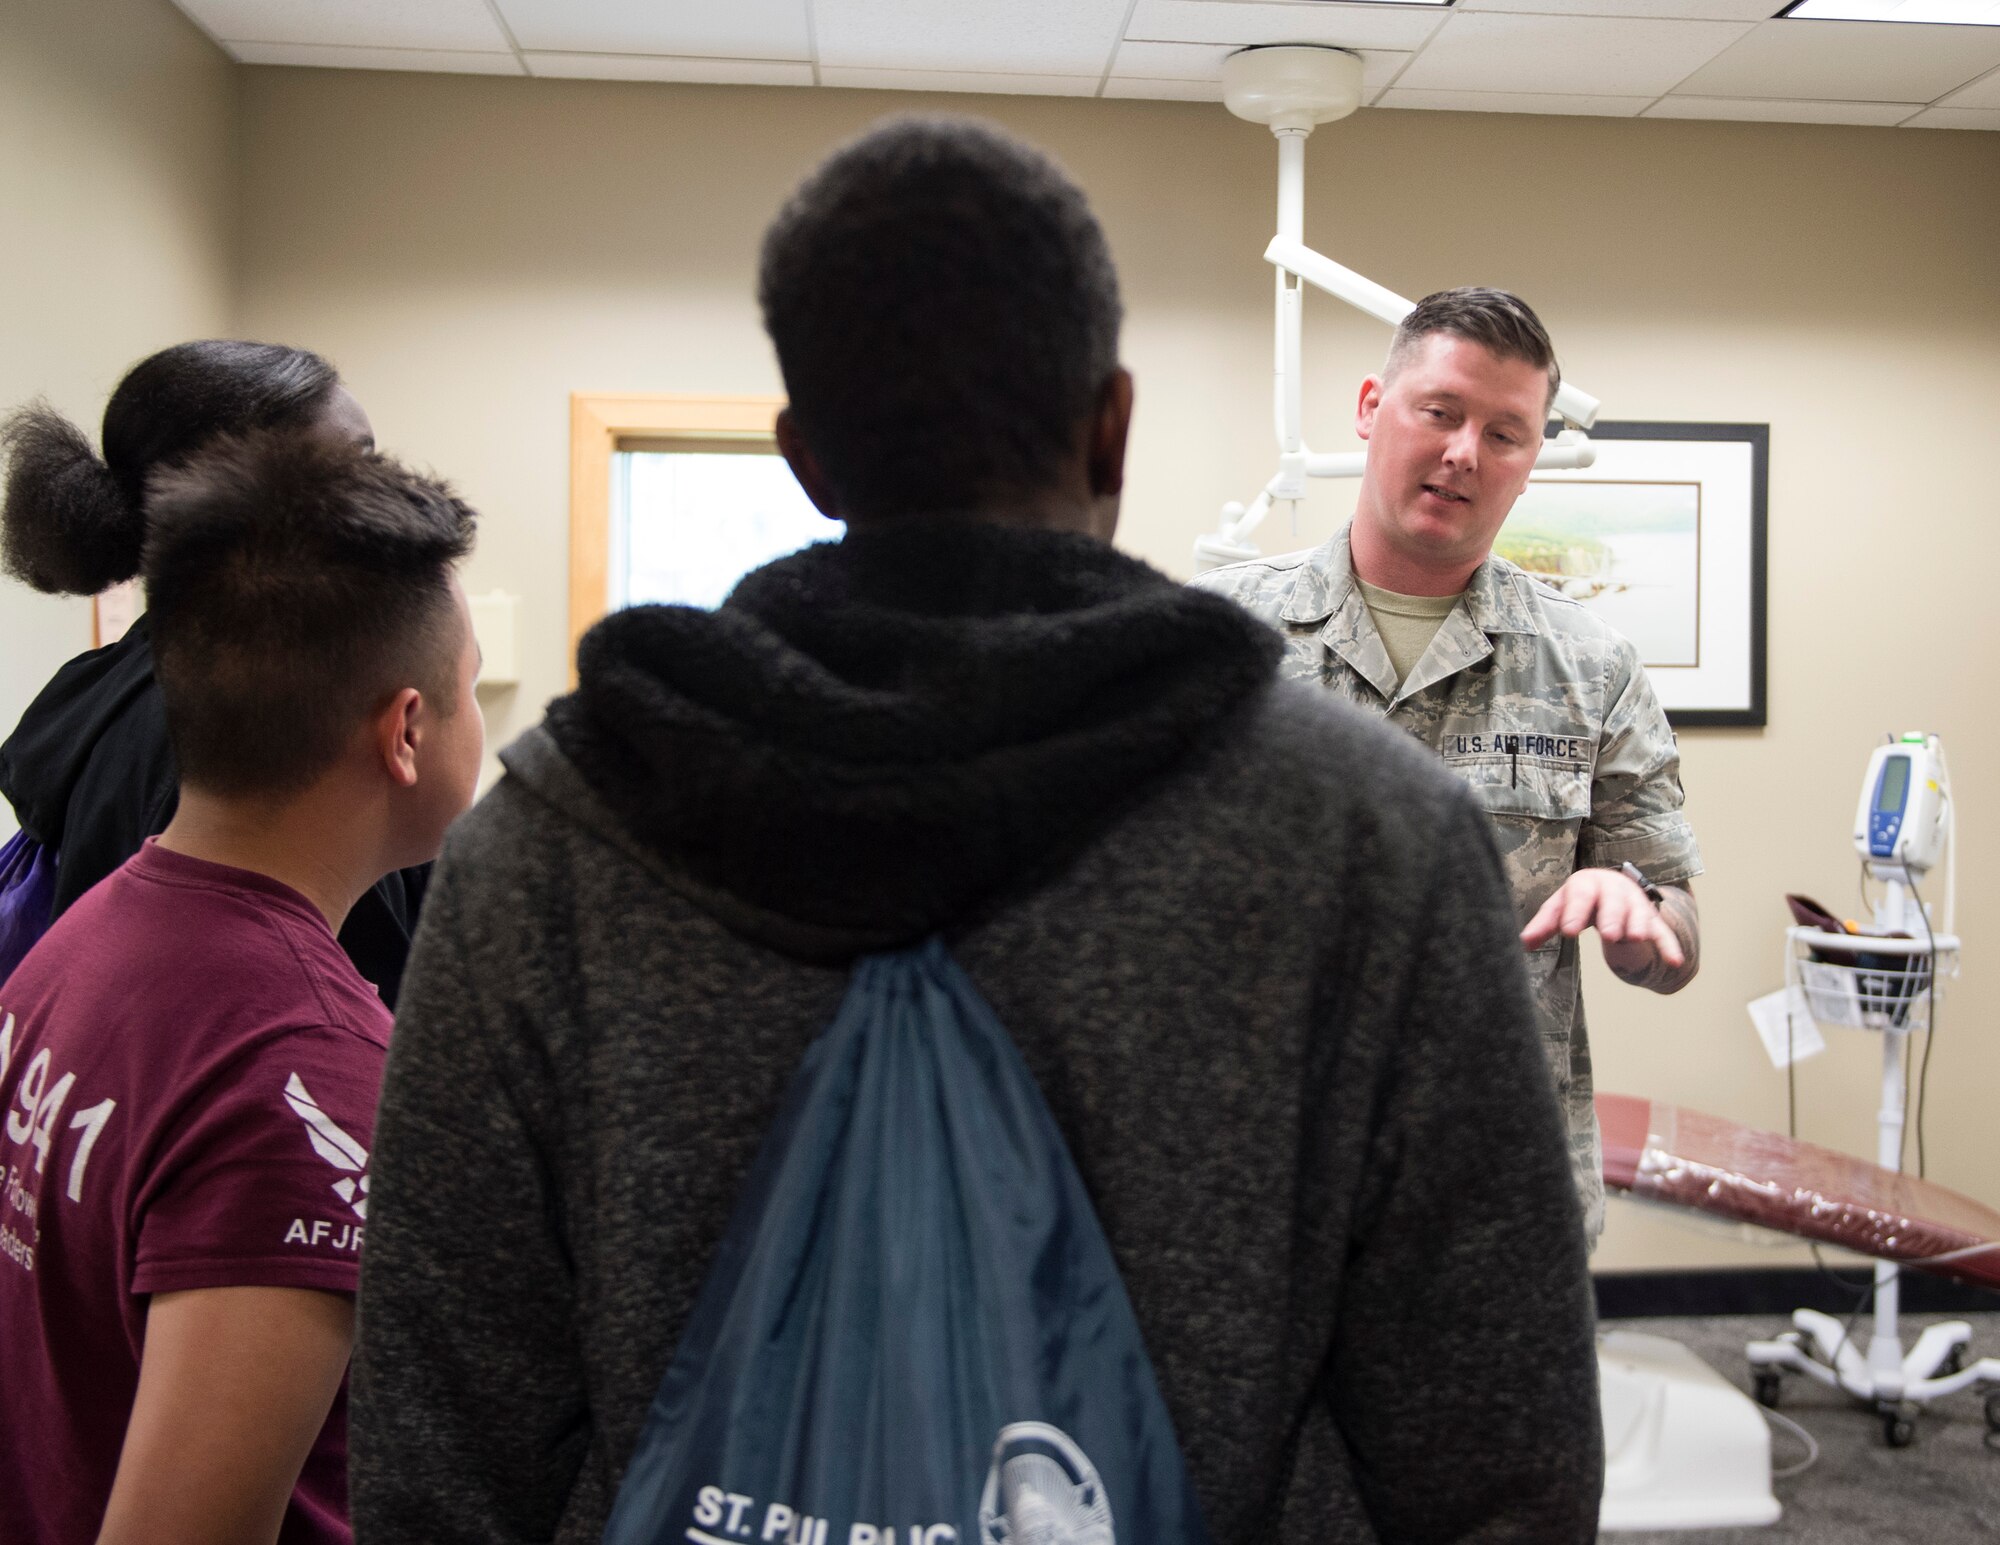 Members from five different Junior Reserve Officer Training Corp (JROTC) units visit the 133rd Airlift Wing on May 15, 2019.